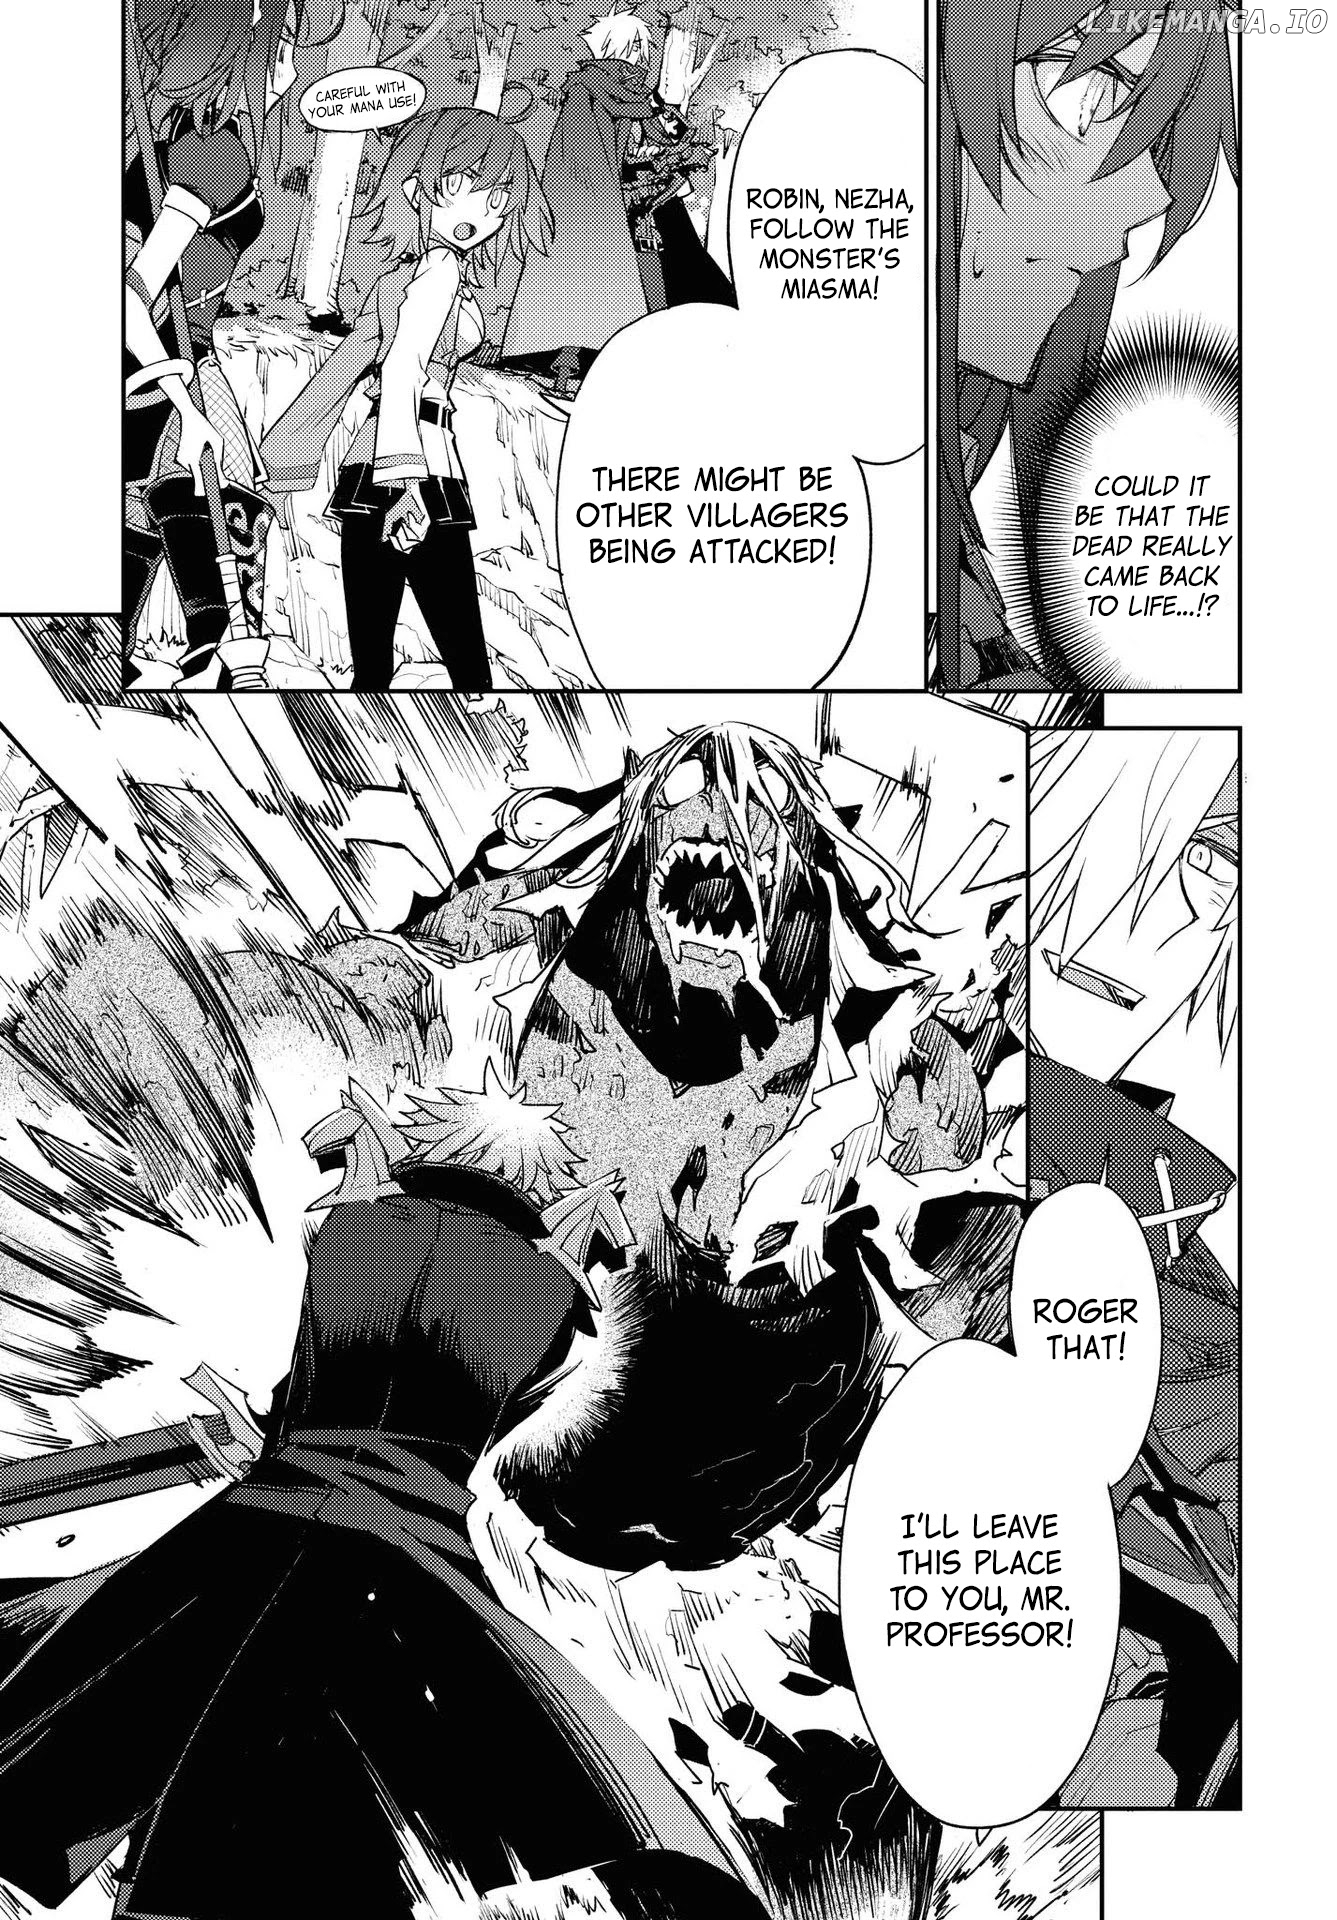 Fate/Grand Order: Epic of Remnant - Subspecies Singularity IV: Taboo Advent Salem: Salem of Heresy chapter 16 - page 5